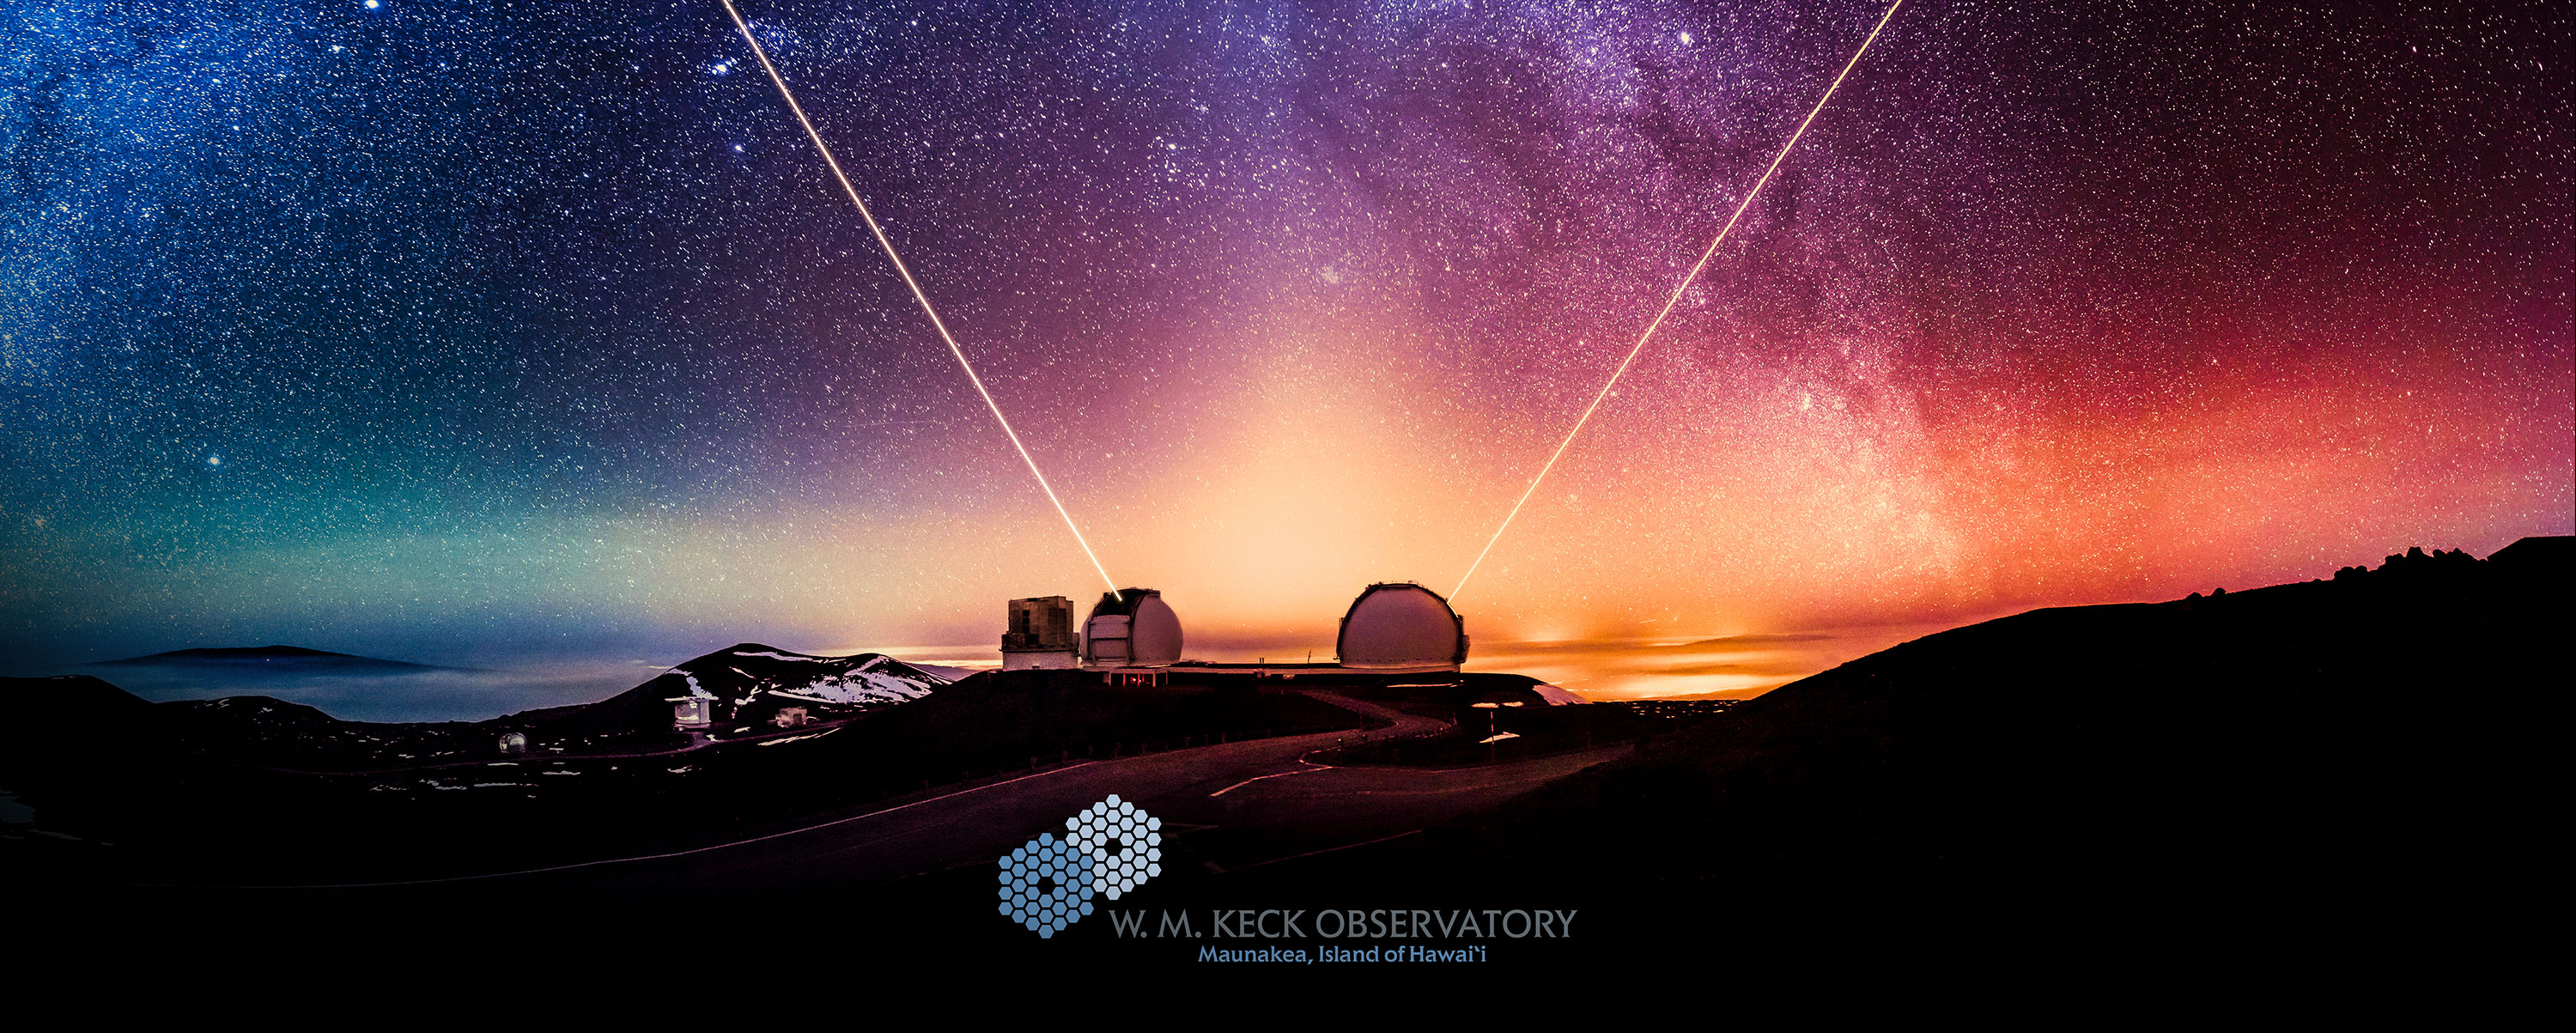 Keck Observatory Domes